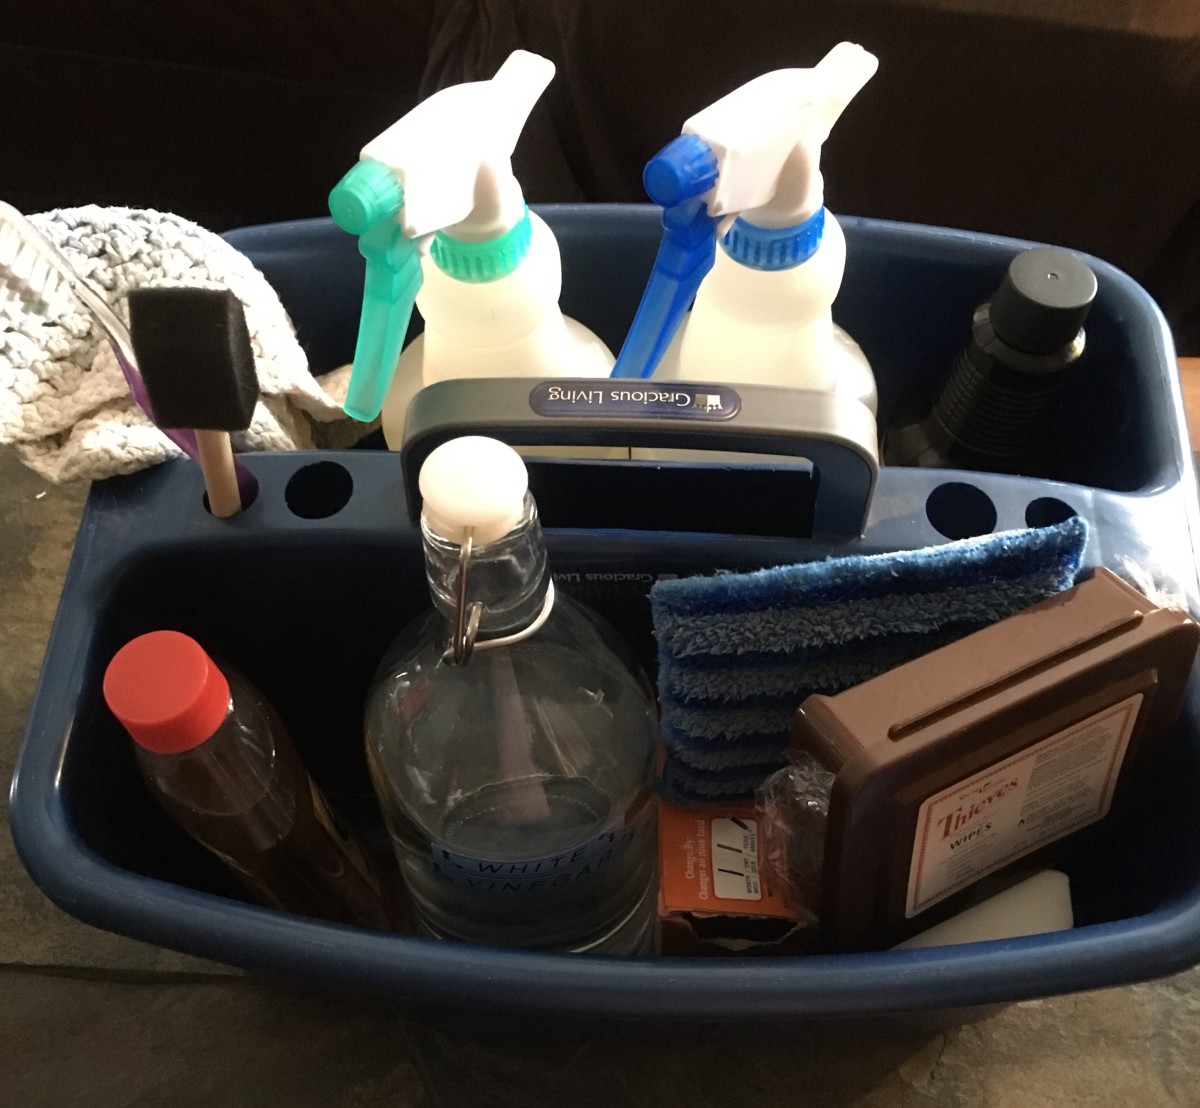 4 Items to Clean (Without Chemicals) at Least Twice a Year